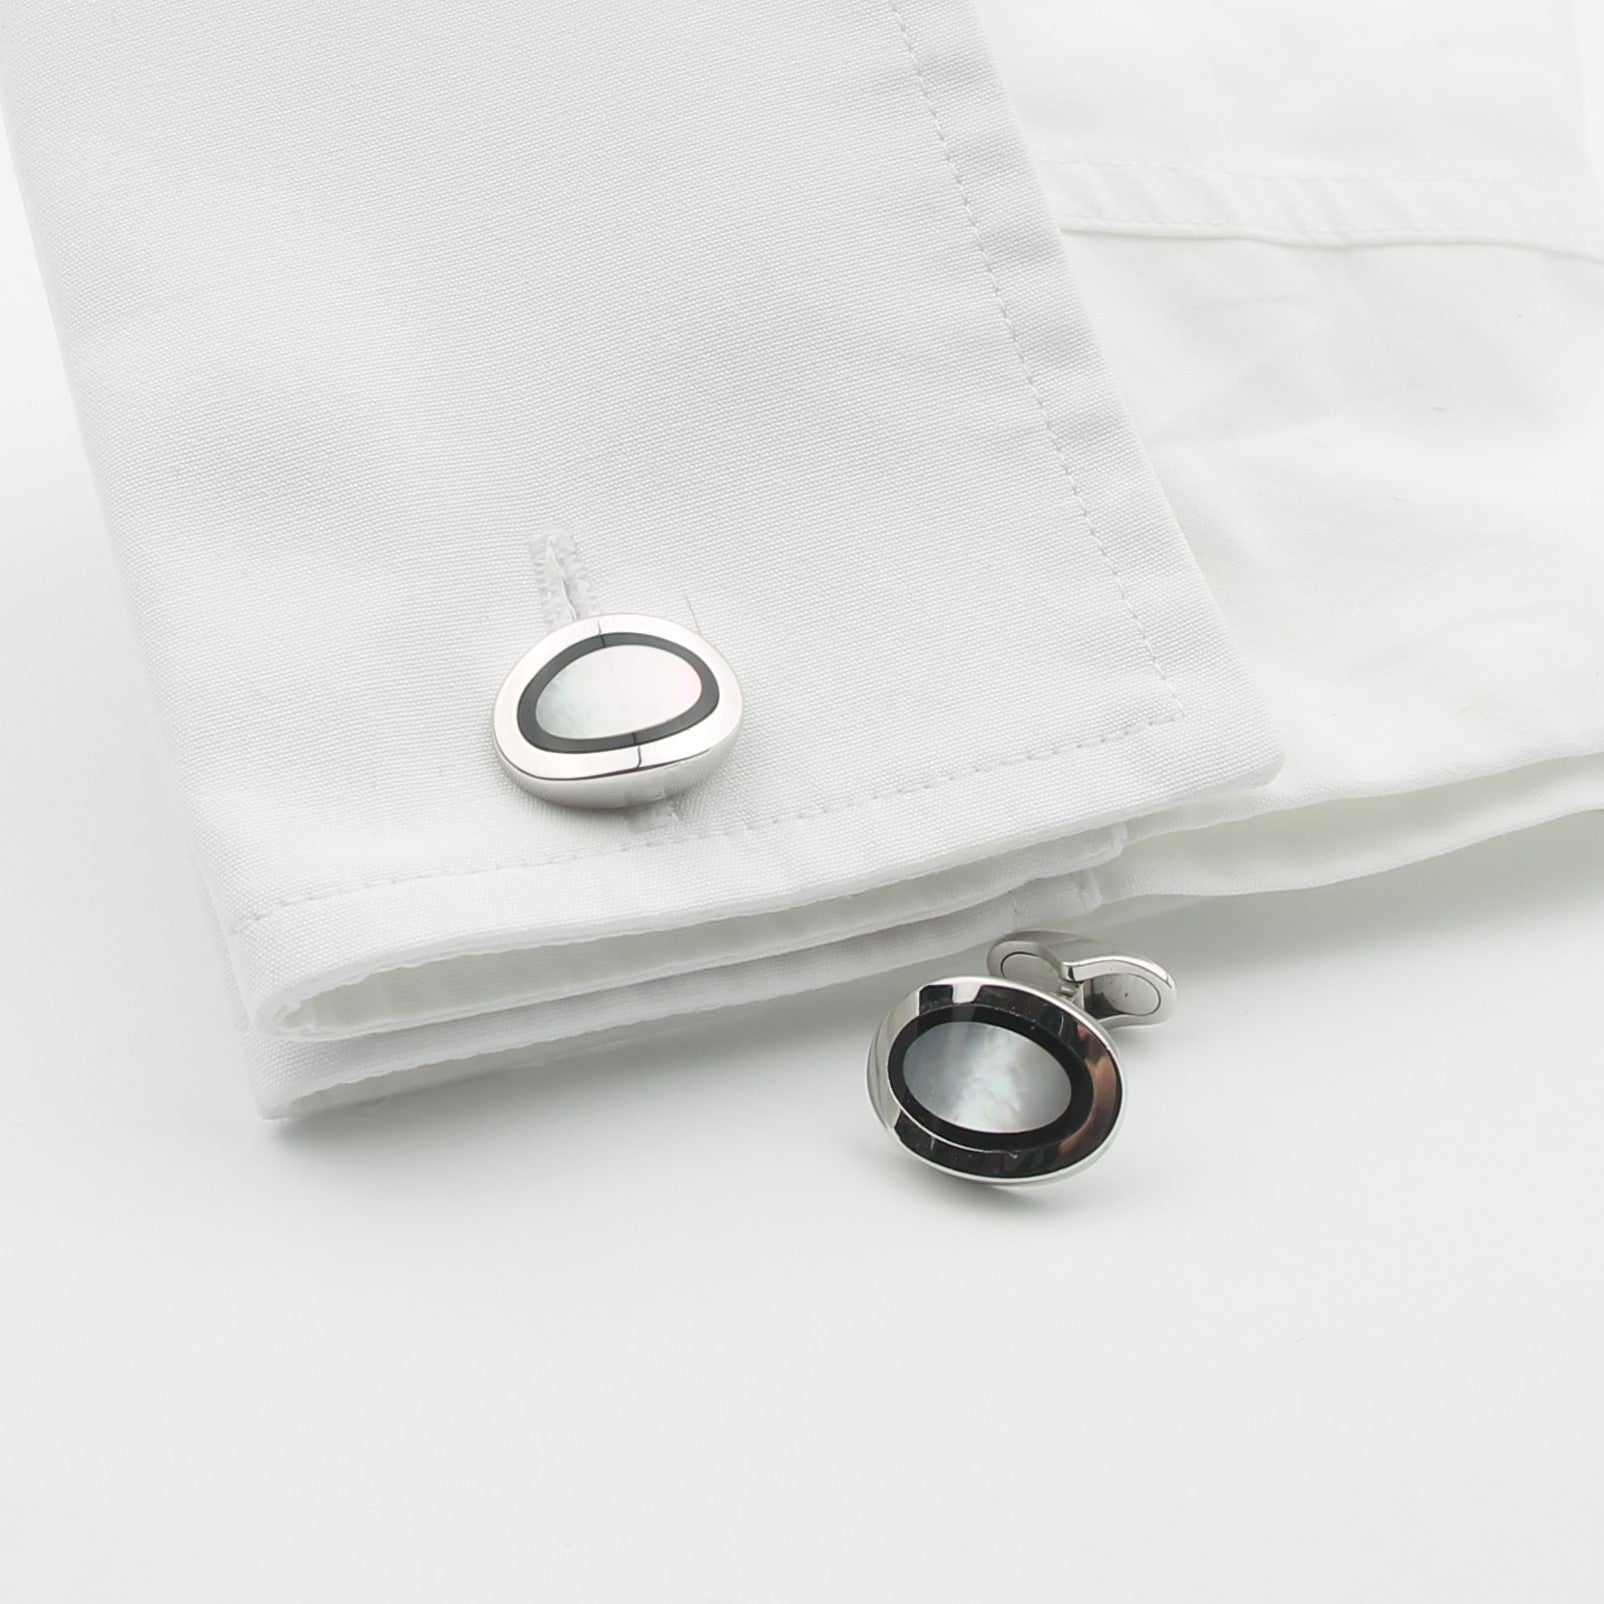 Onyx and mother of pearl cufflinks in a cuff